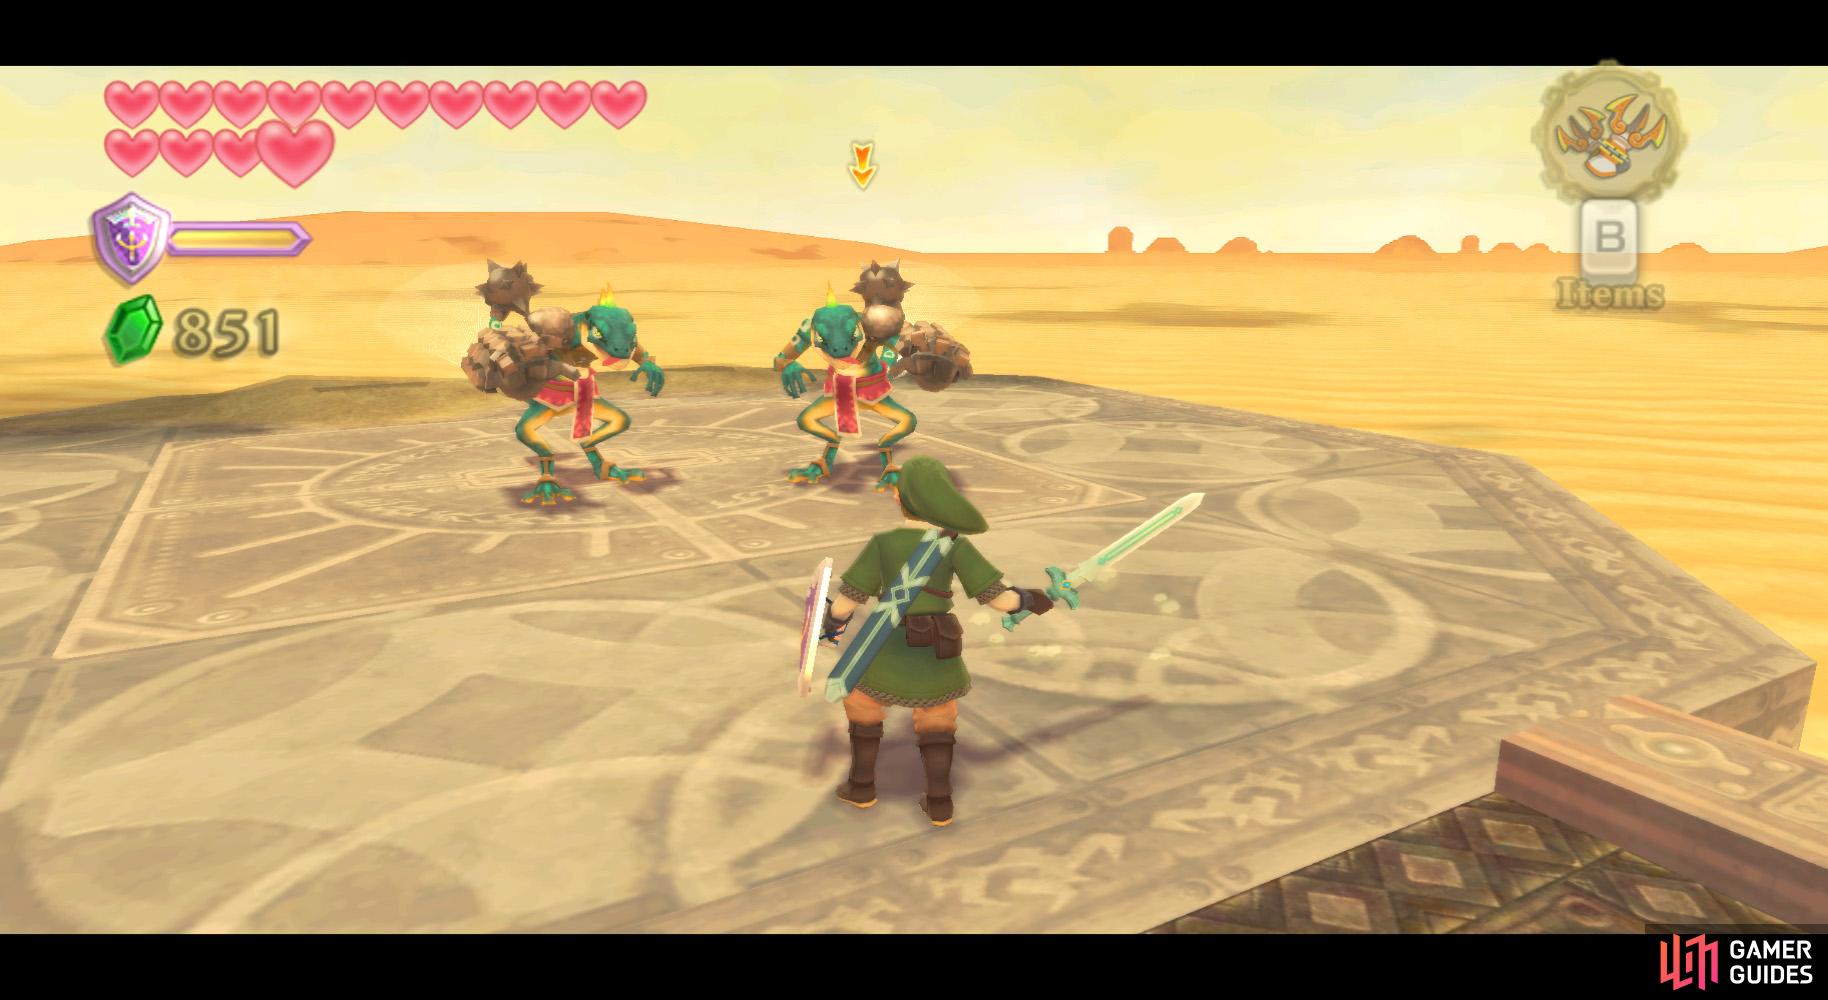 These Lizalfos should die quicker against your improved sword.